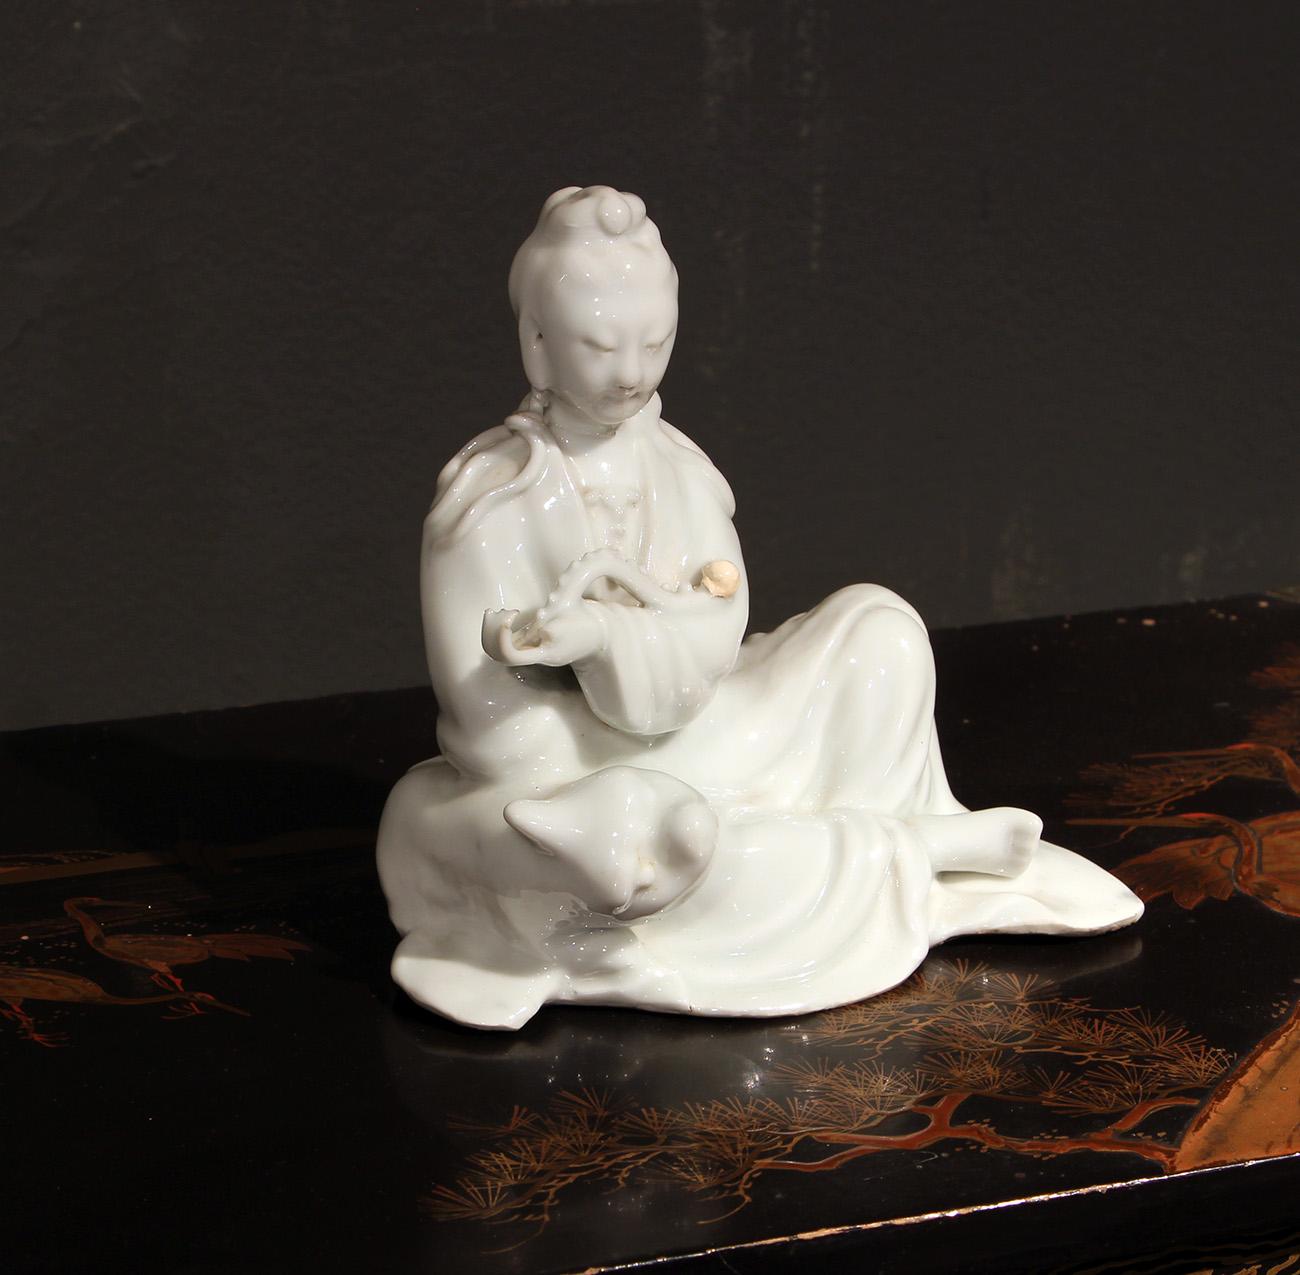 Chinese blanc de chine of a porcelain Quan Yin in a sitting position dressed in a soft robe, holding a scepter  Emperor's Ruyi.